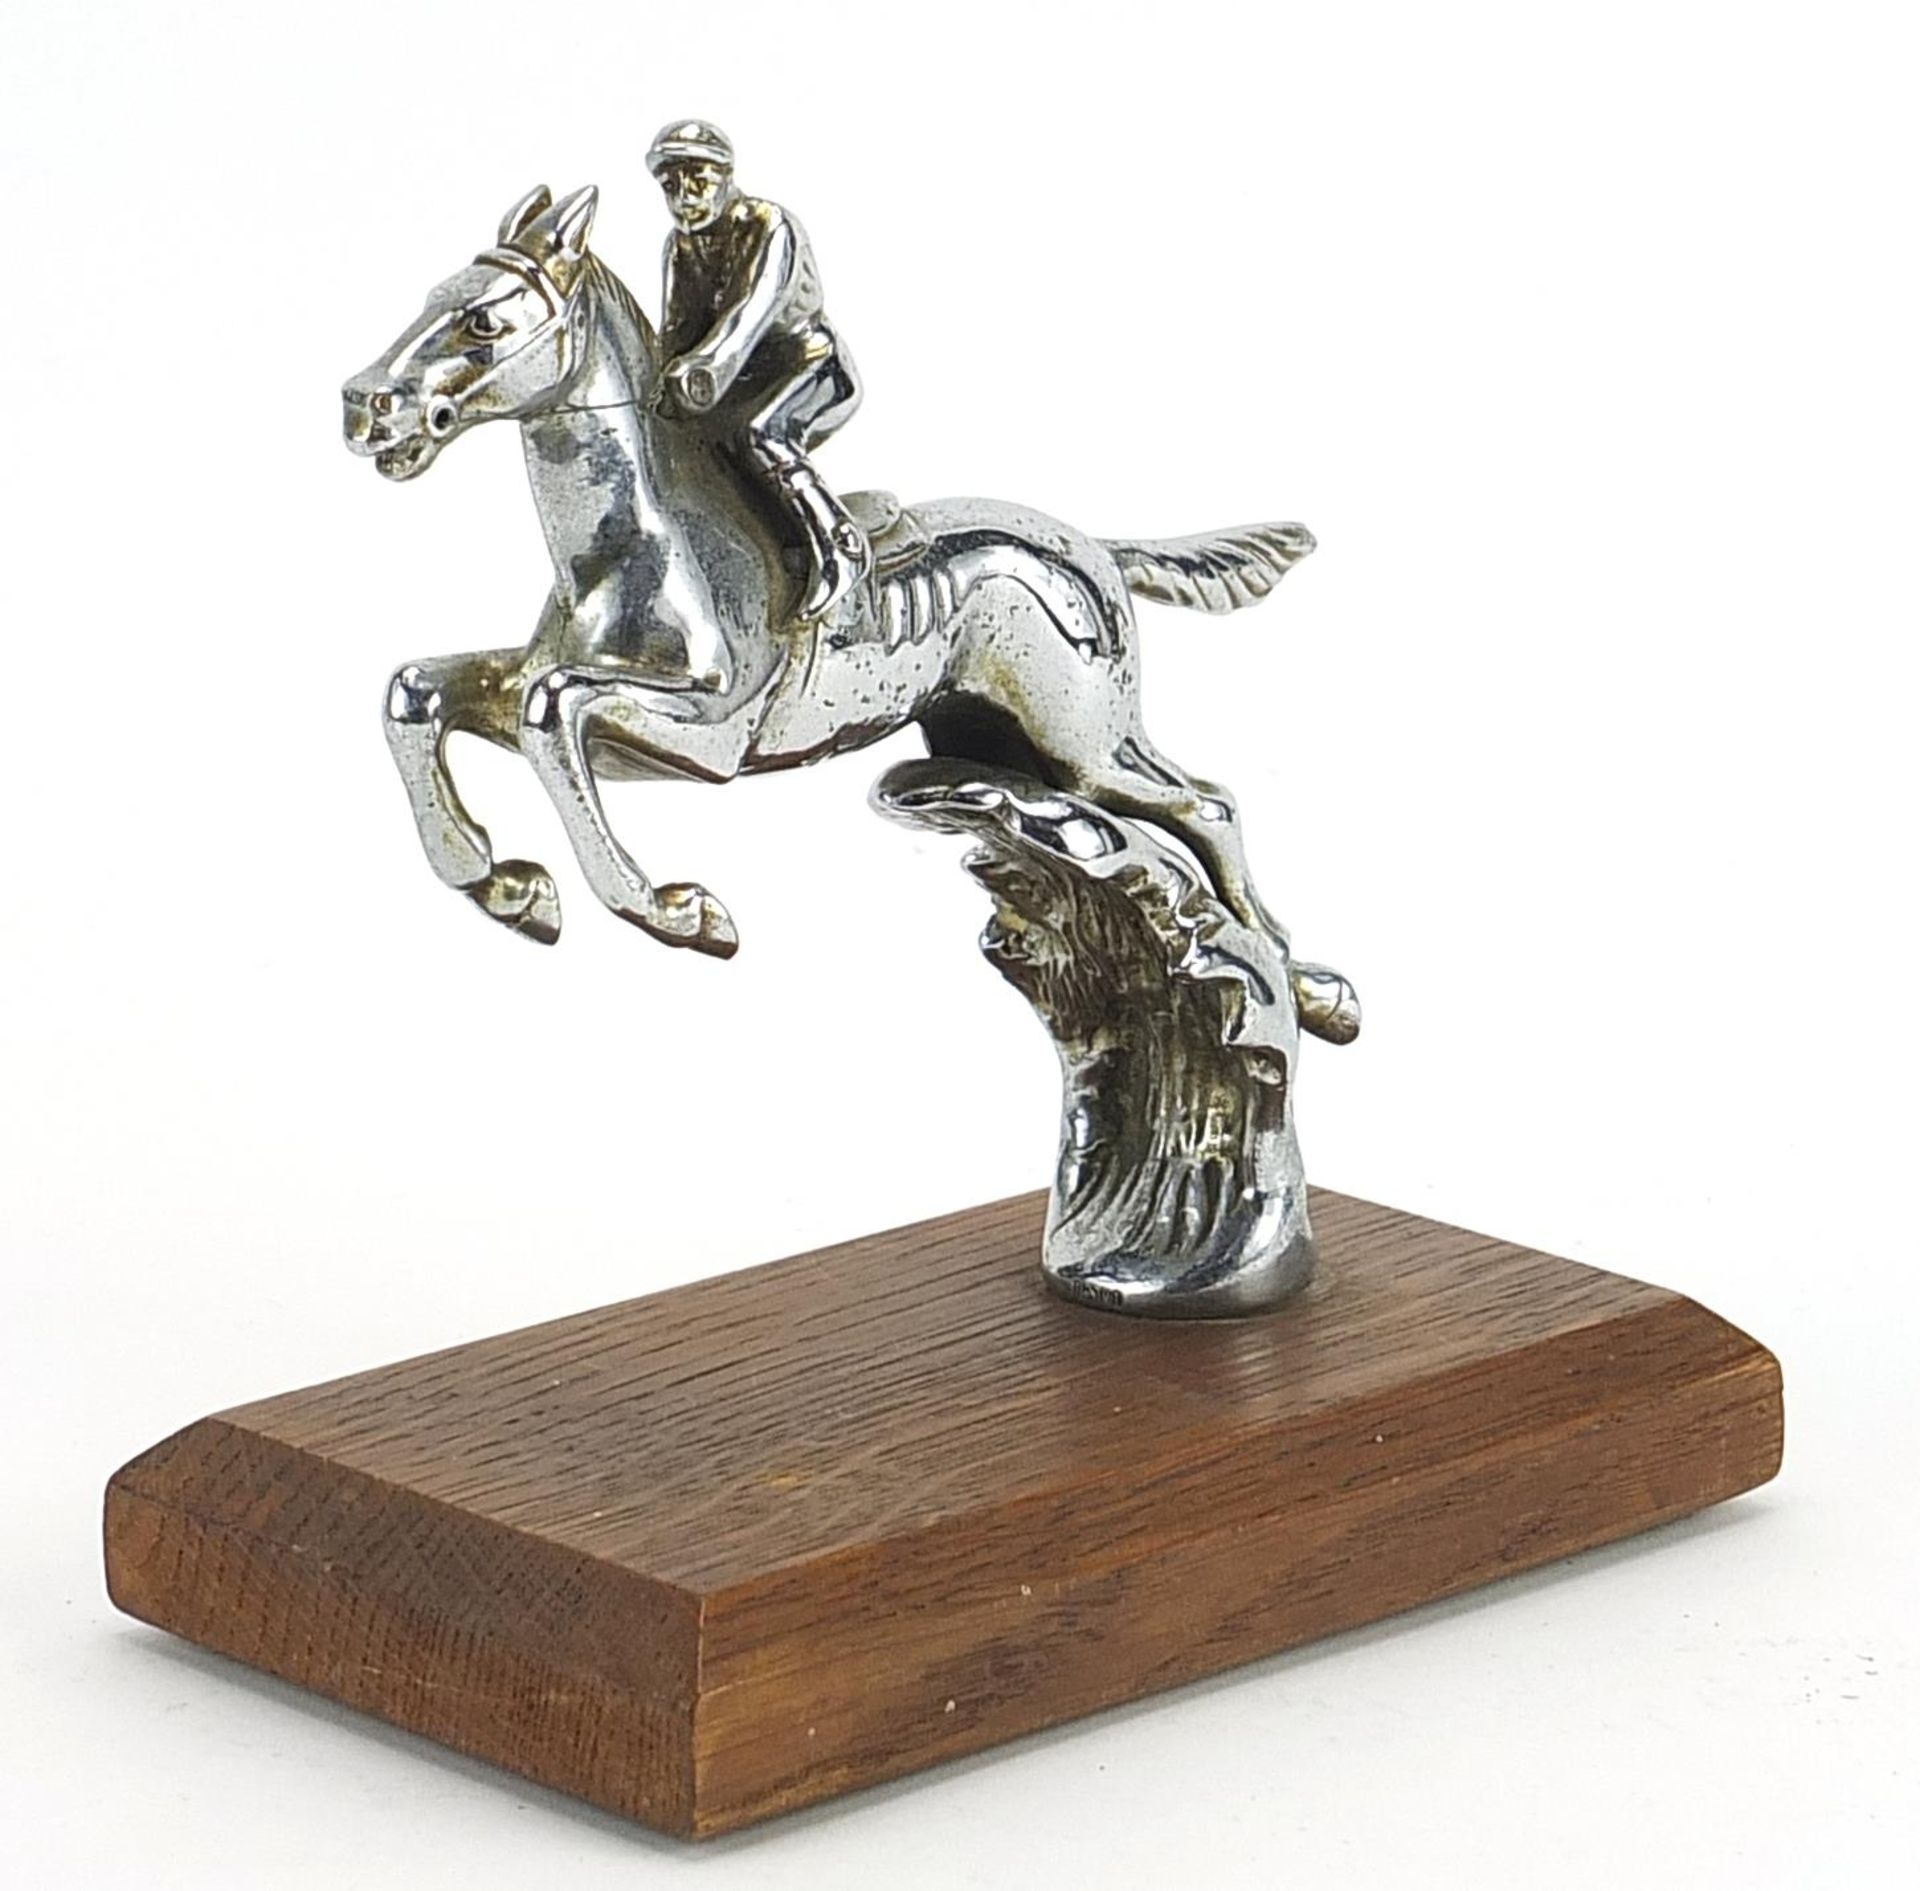 Desmo, vintage chrome plated car mascot in the form of a jockey on horseback raised on a later